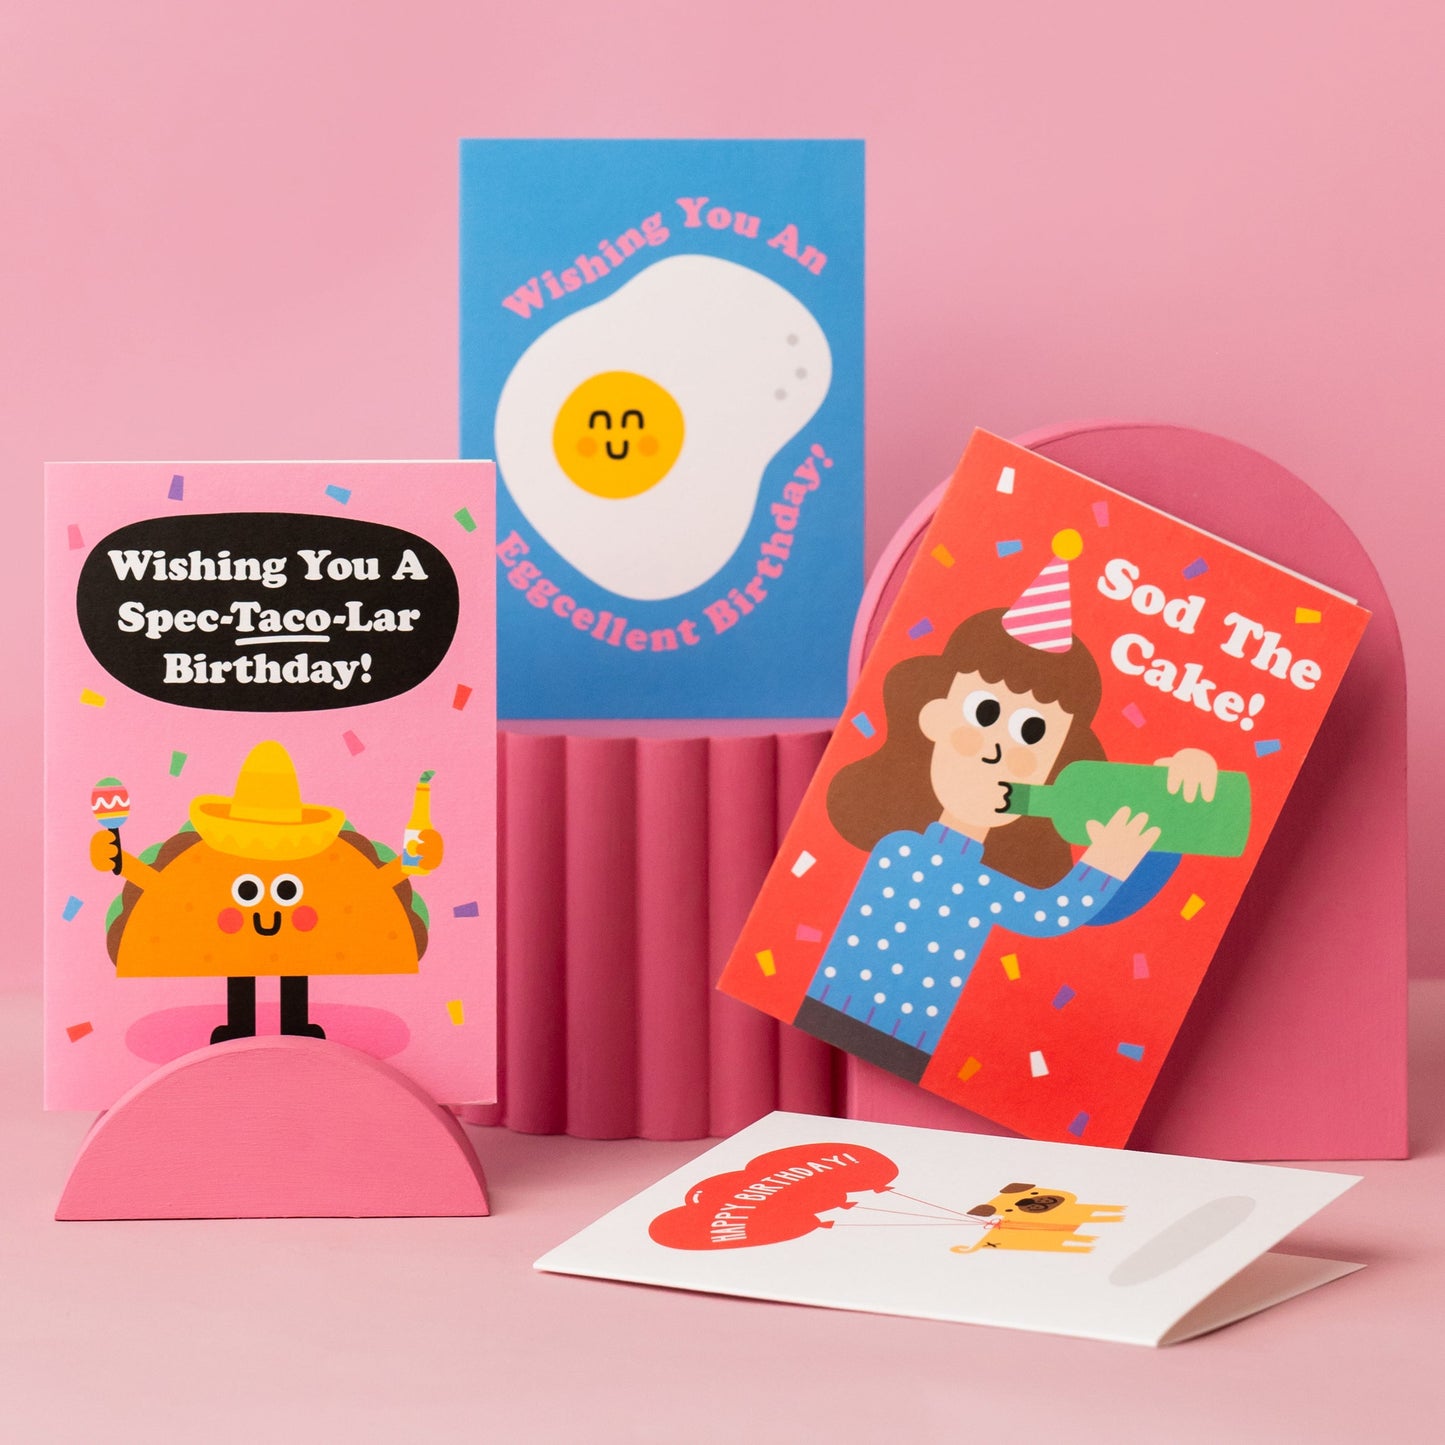 A collection of birthday cards on a pink background.